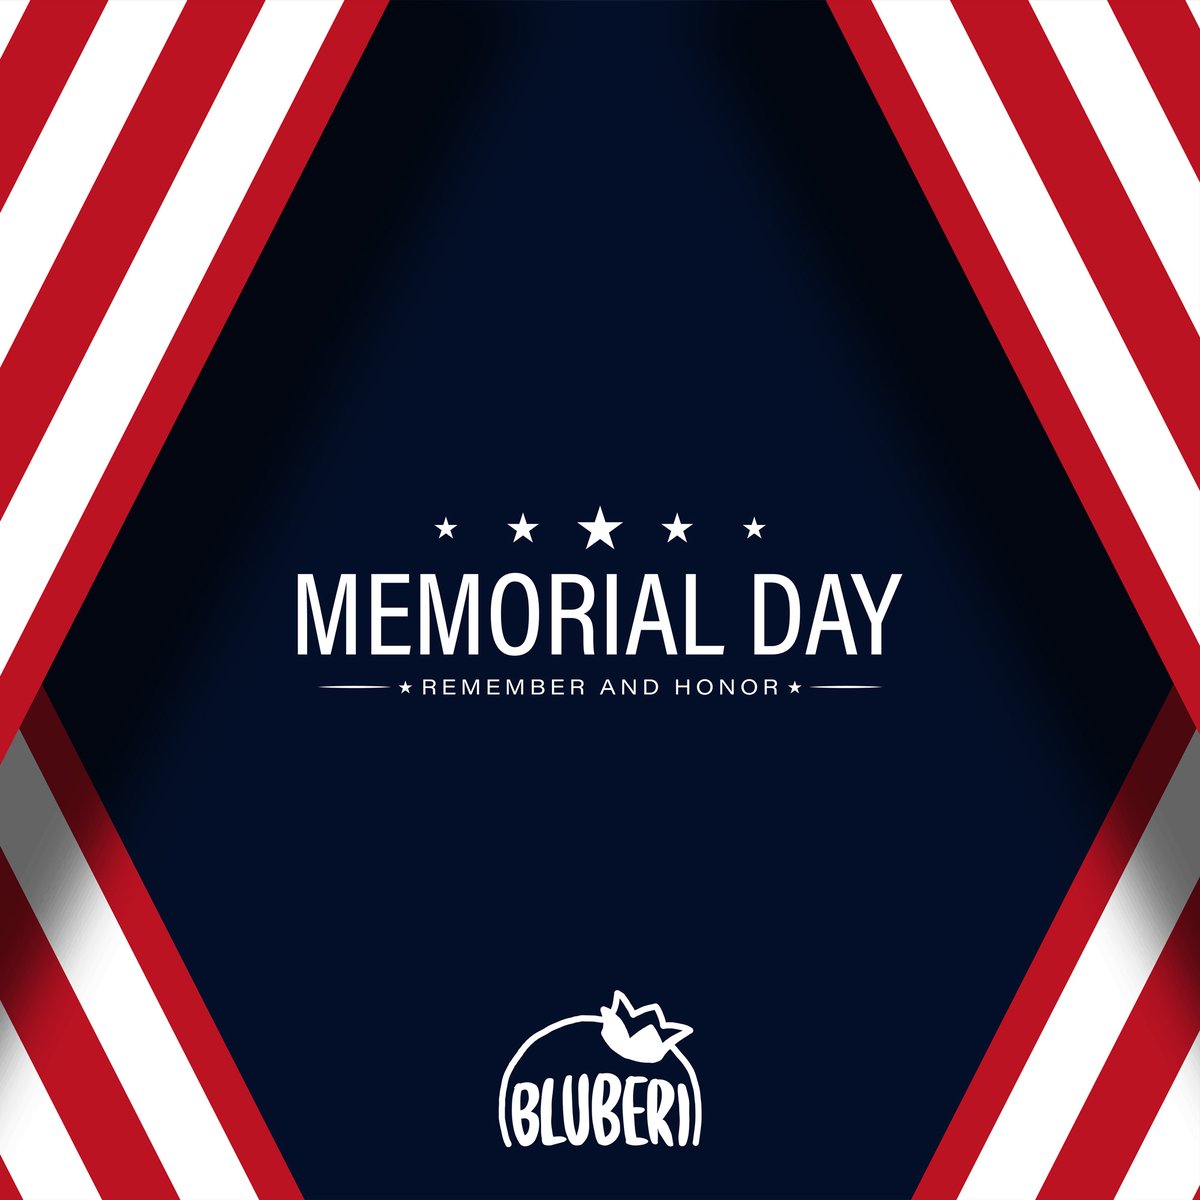 On this Memorial Day, let us reflect on the sacrifices made, offer our heartfelt thanks, and pledge to never forget the heroes who have shaped US history.

#MemorialDay #HonorTheFallen #RememberAndReflect #GratefulNation #NeverForget